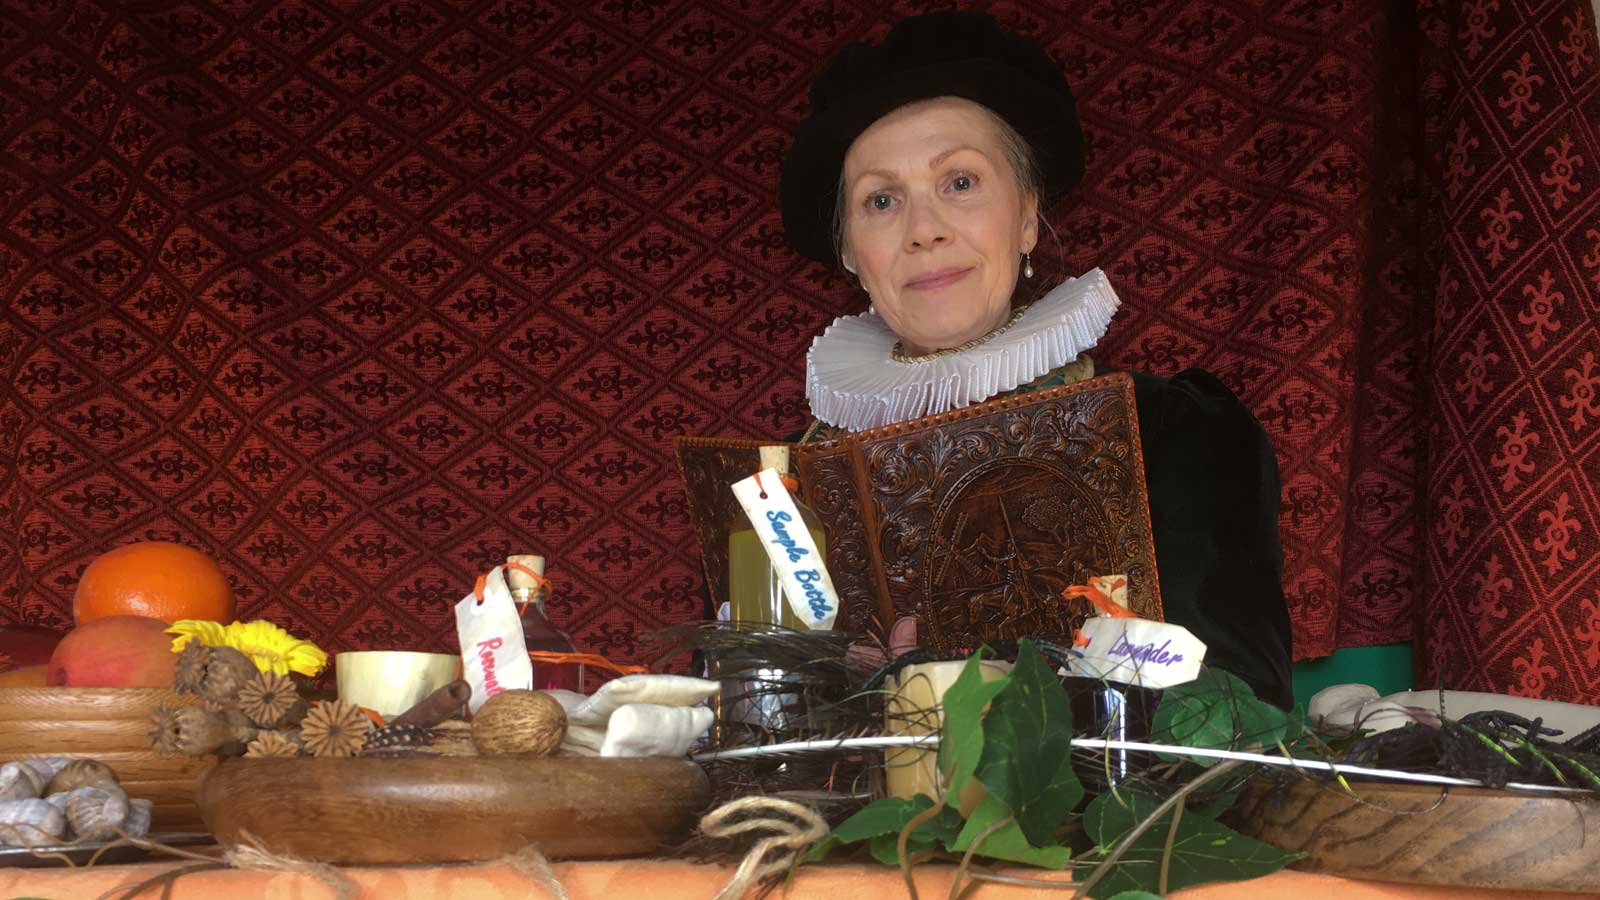 Woman in a Tudor outfit teaching 16th century medicine